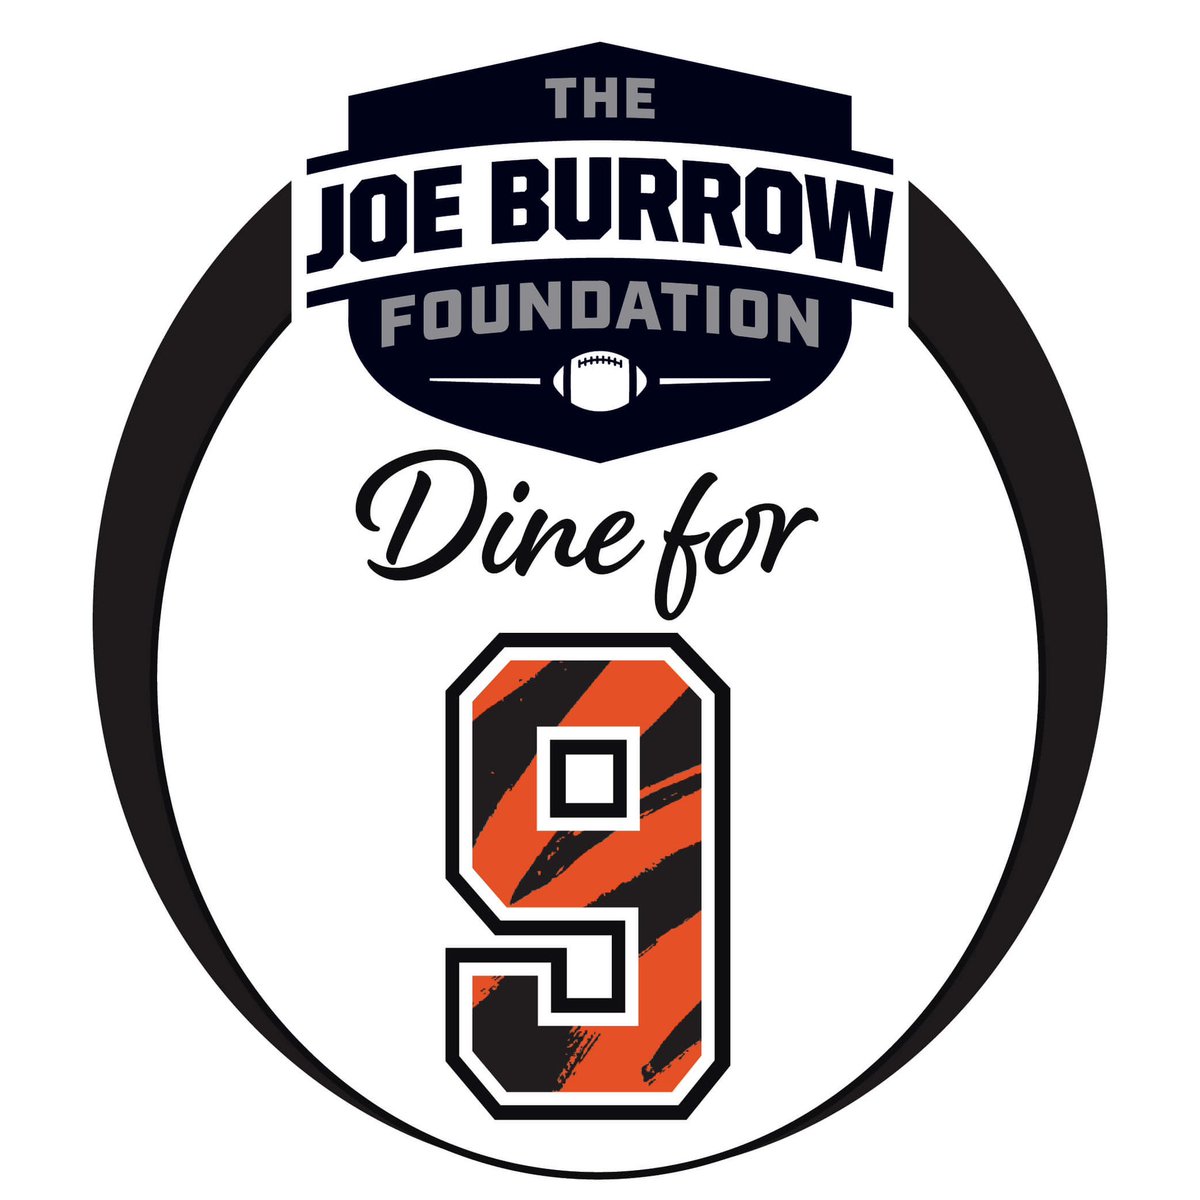 Joe Burrow has supported our city, so let’s return the favor & support @Burrowfdn. Stop into Tom & Chee on 9/9 for his 'Dine for 9.' 9% of ALL sales will go back to the Joe Burrow Foundation. #JBFDineFor9